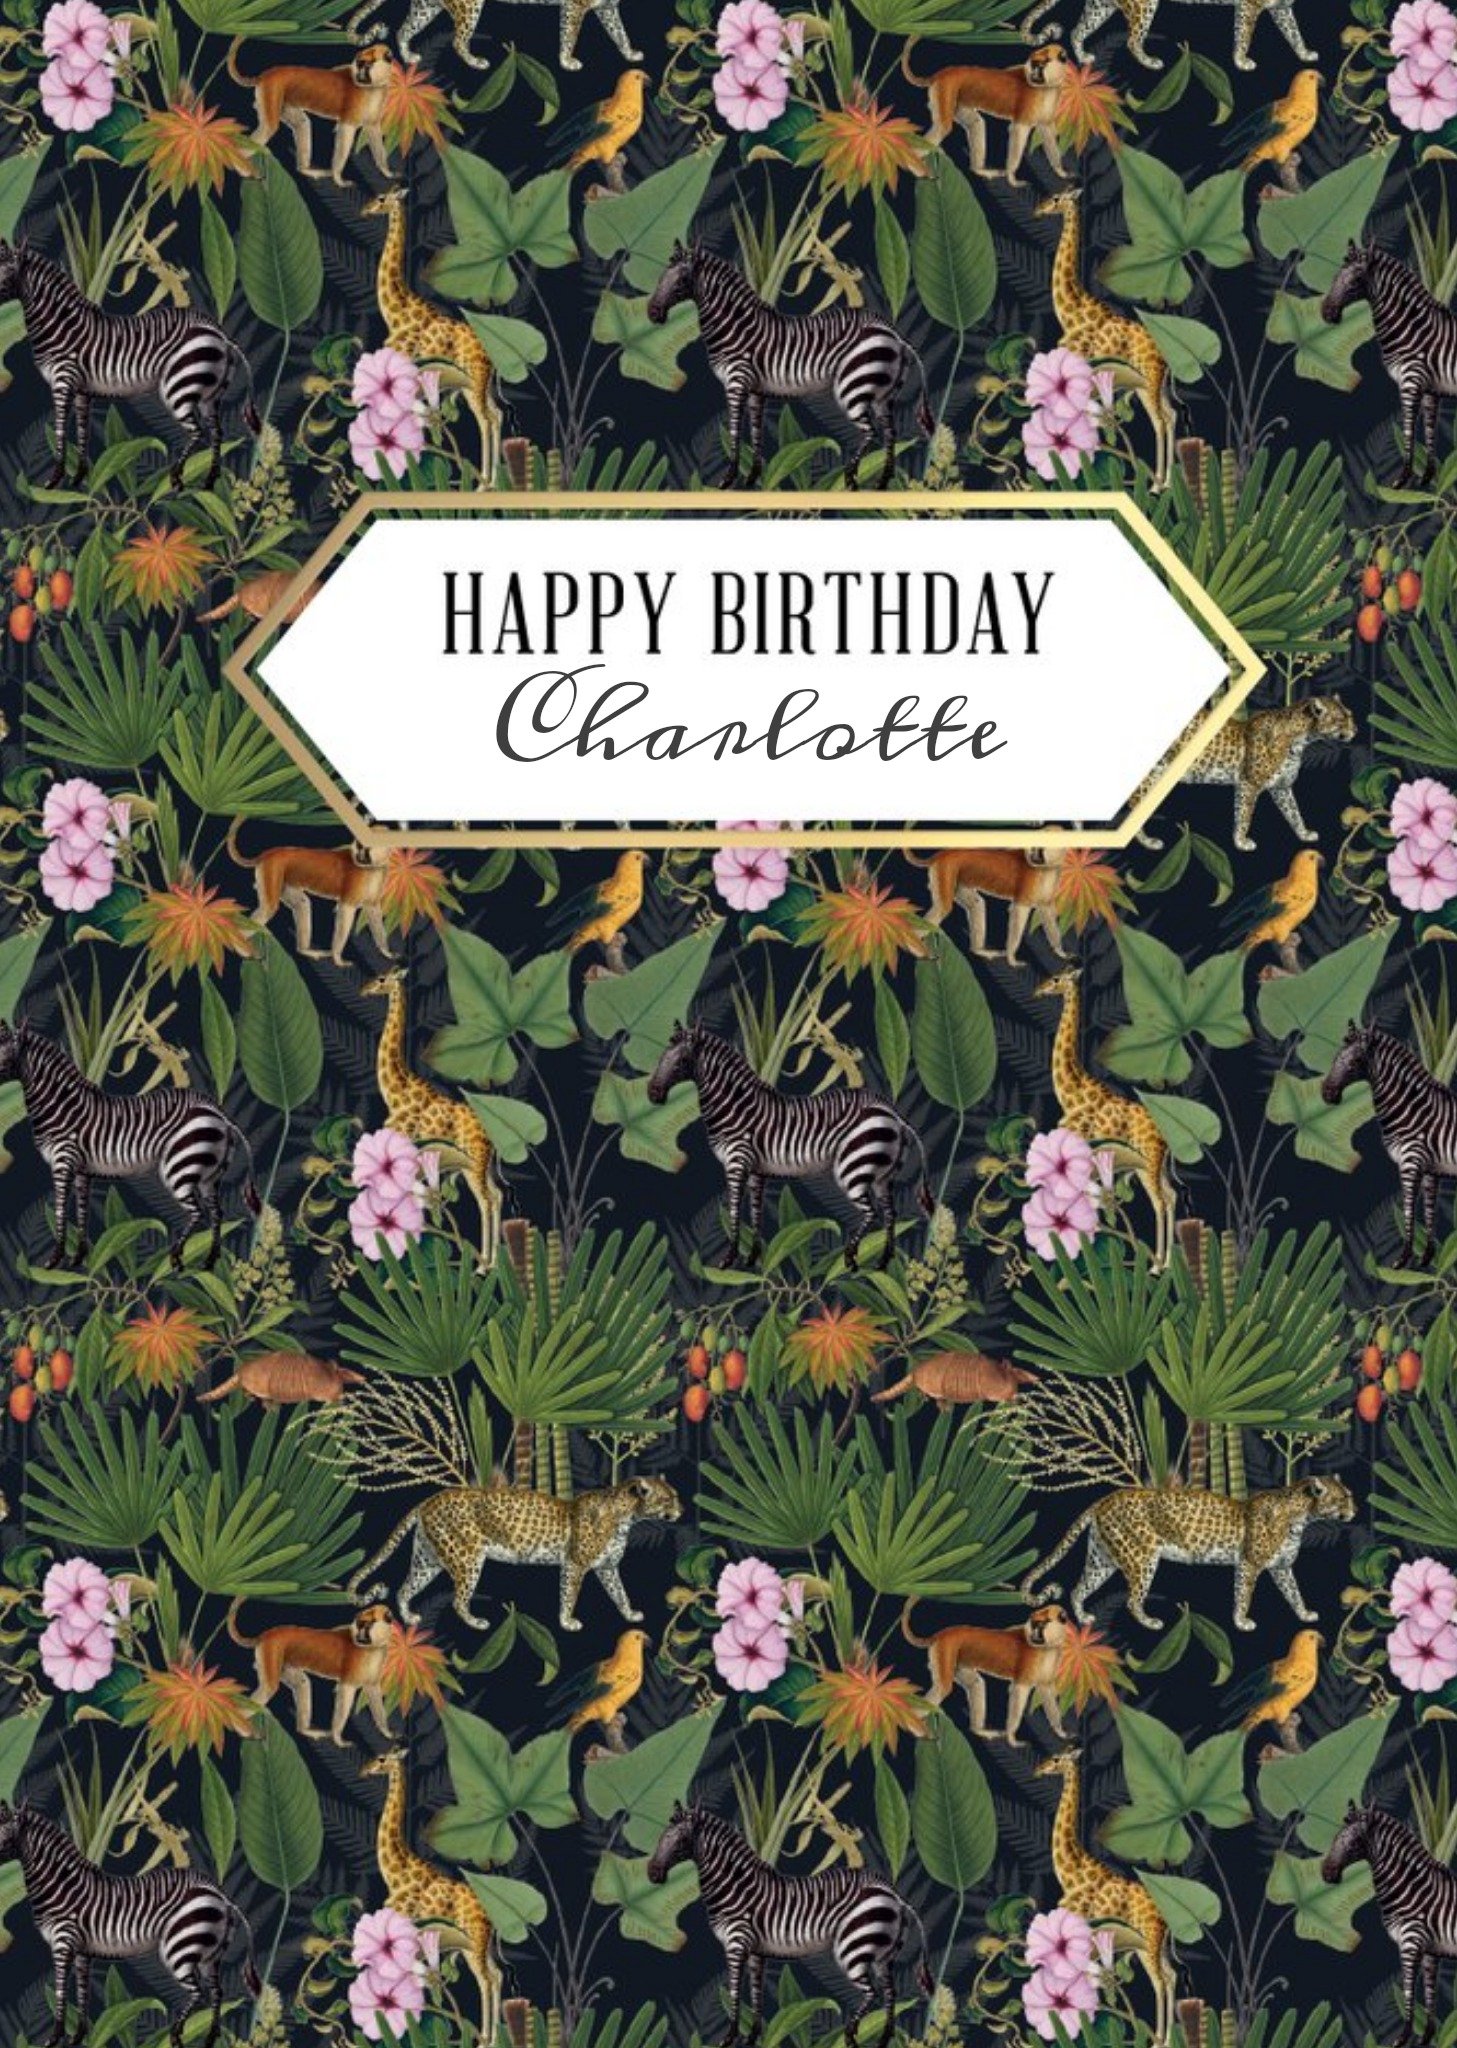 The Natural History Museum Natural History Museum Happy Birthday Zebra And Tiger Card, Large